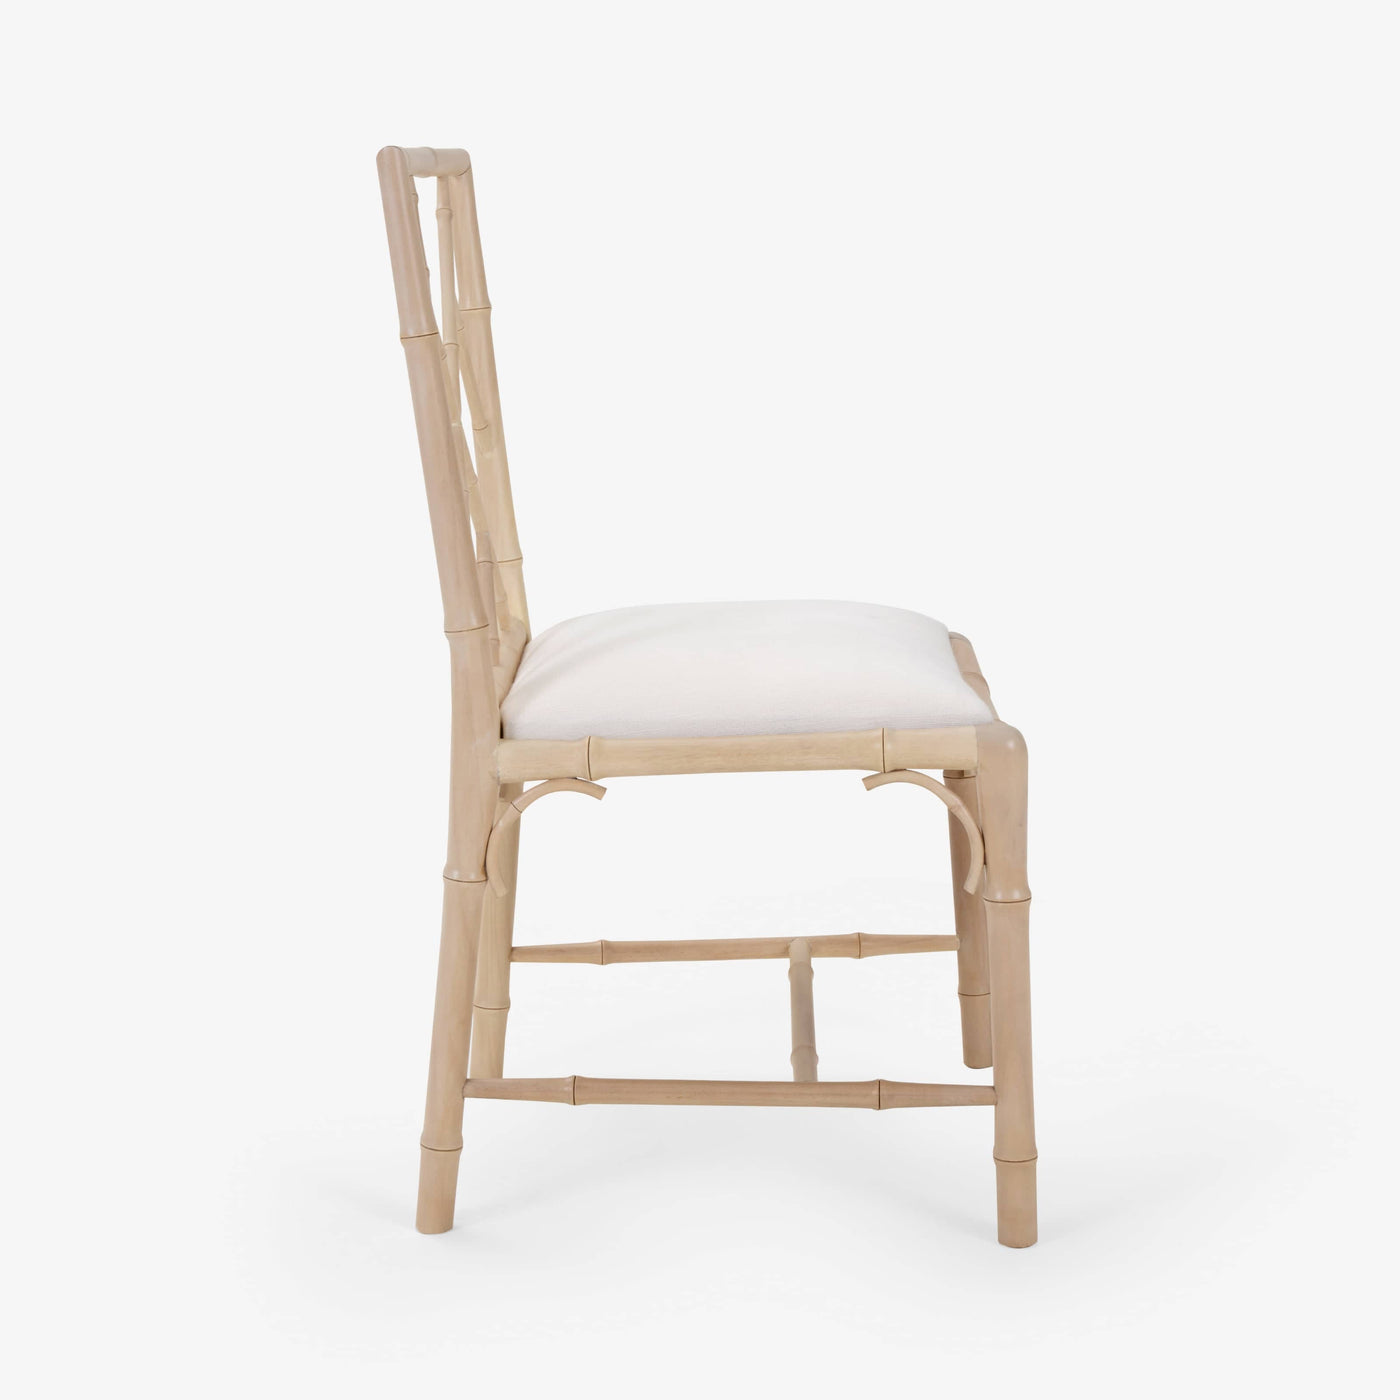 Pescari Dining Chair, Off-White - Cream Dining Chairs & Benches sazy.com